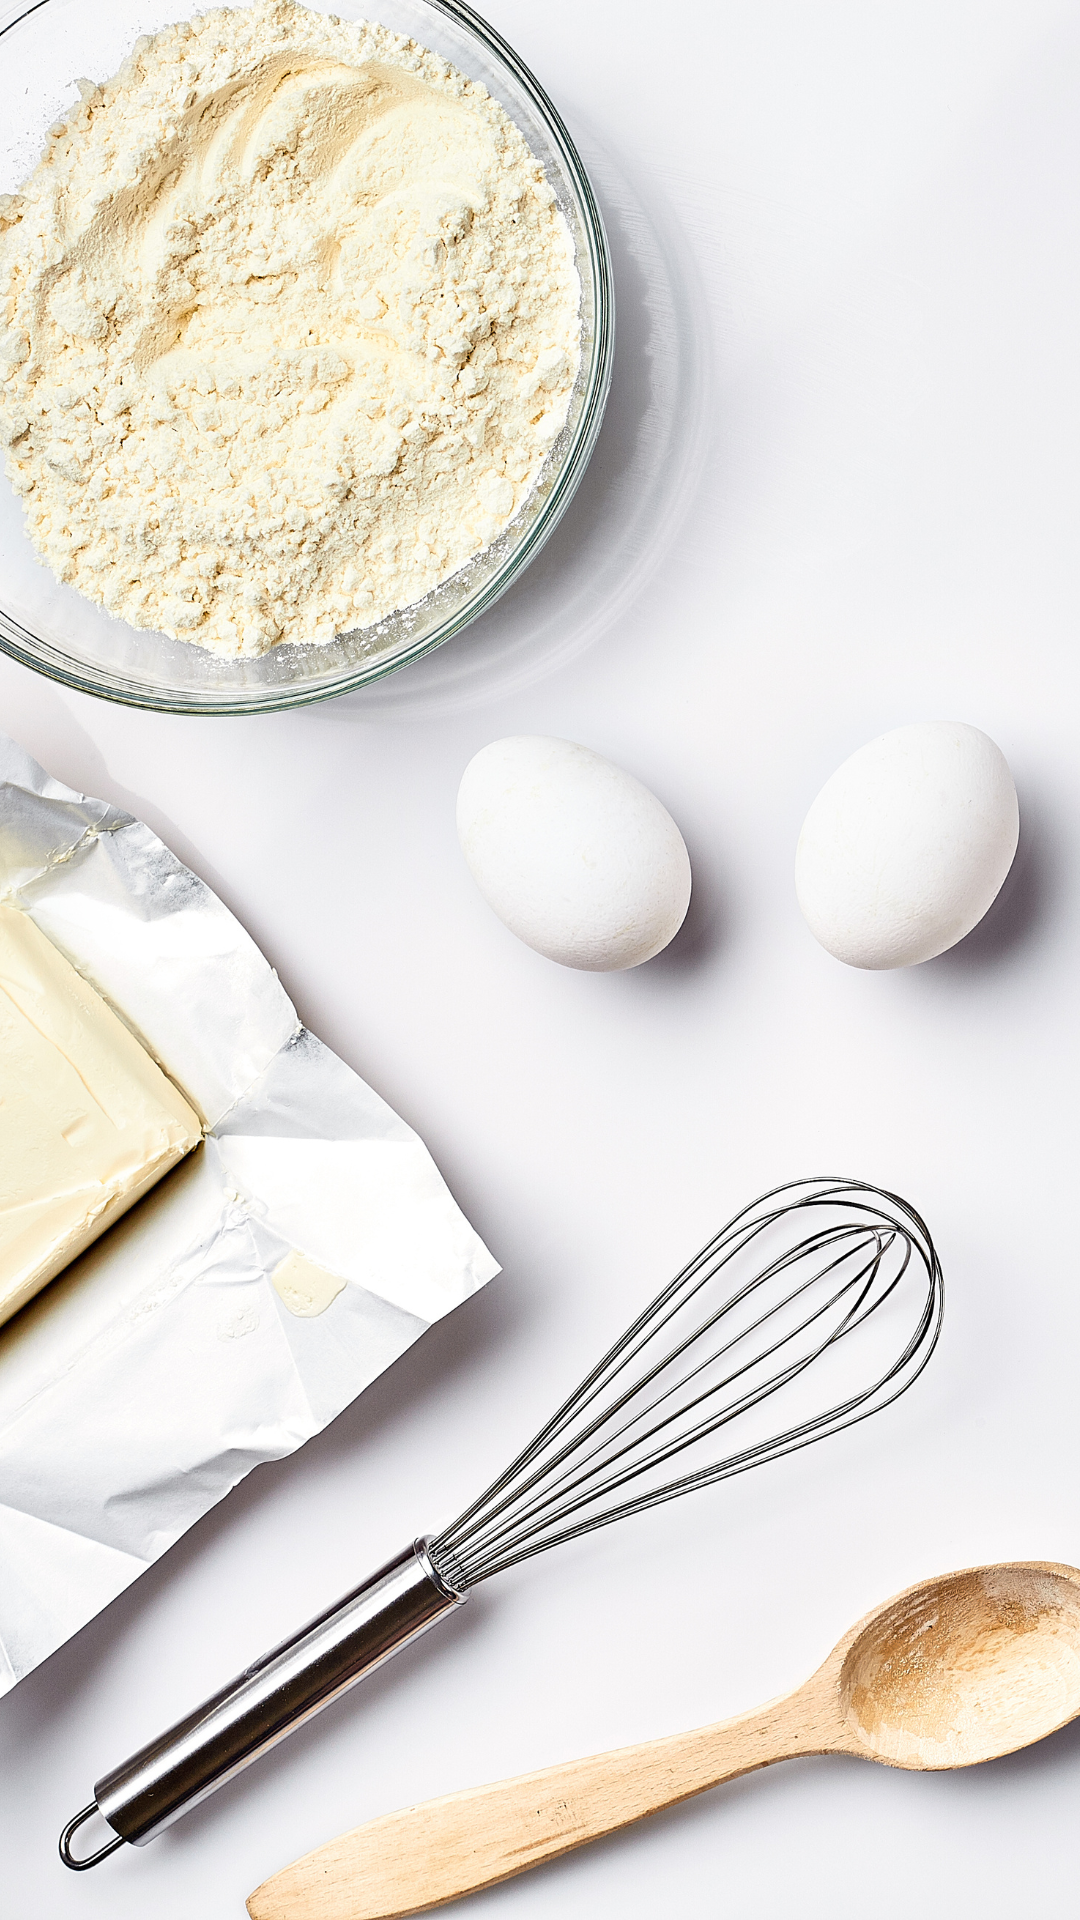 Basic baking ingredients laid out including flour, eggs, butter, a whisk, and a wooden spoon, ready for a healthy recipe preparation.